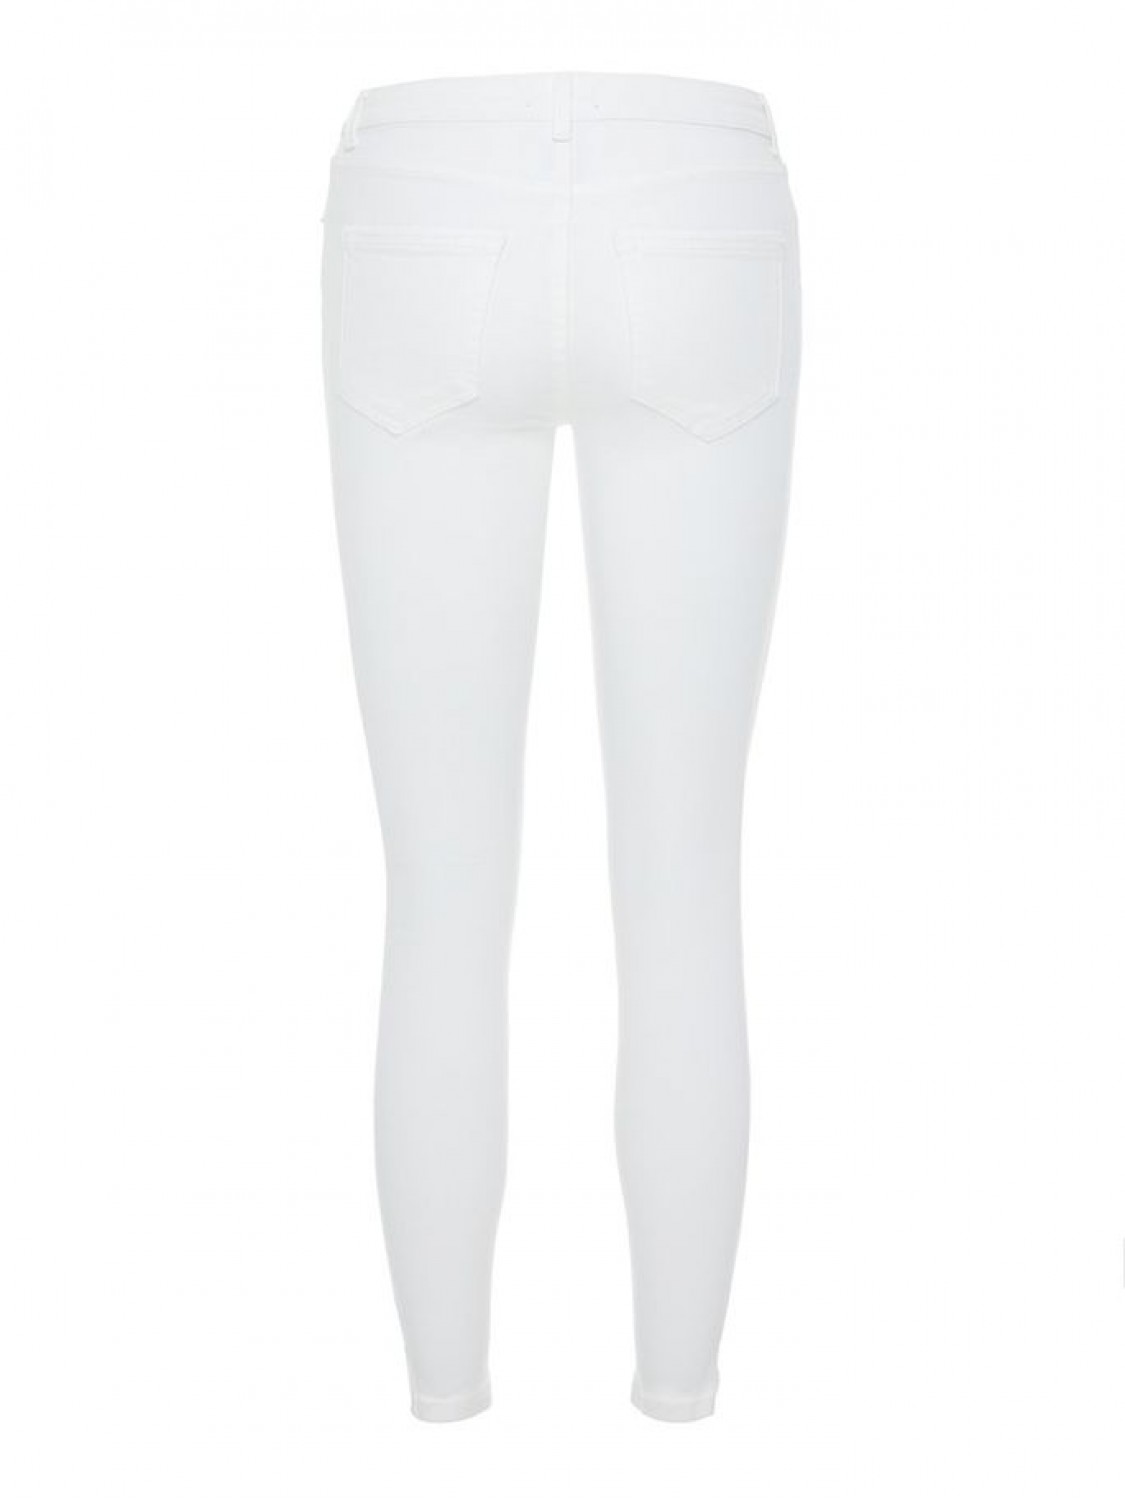 Jeans abertura lateral blancos